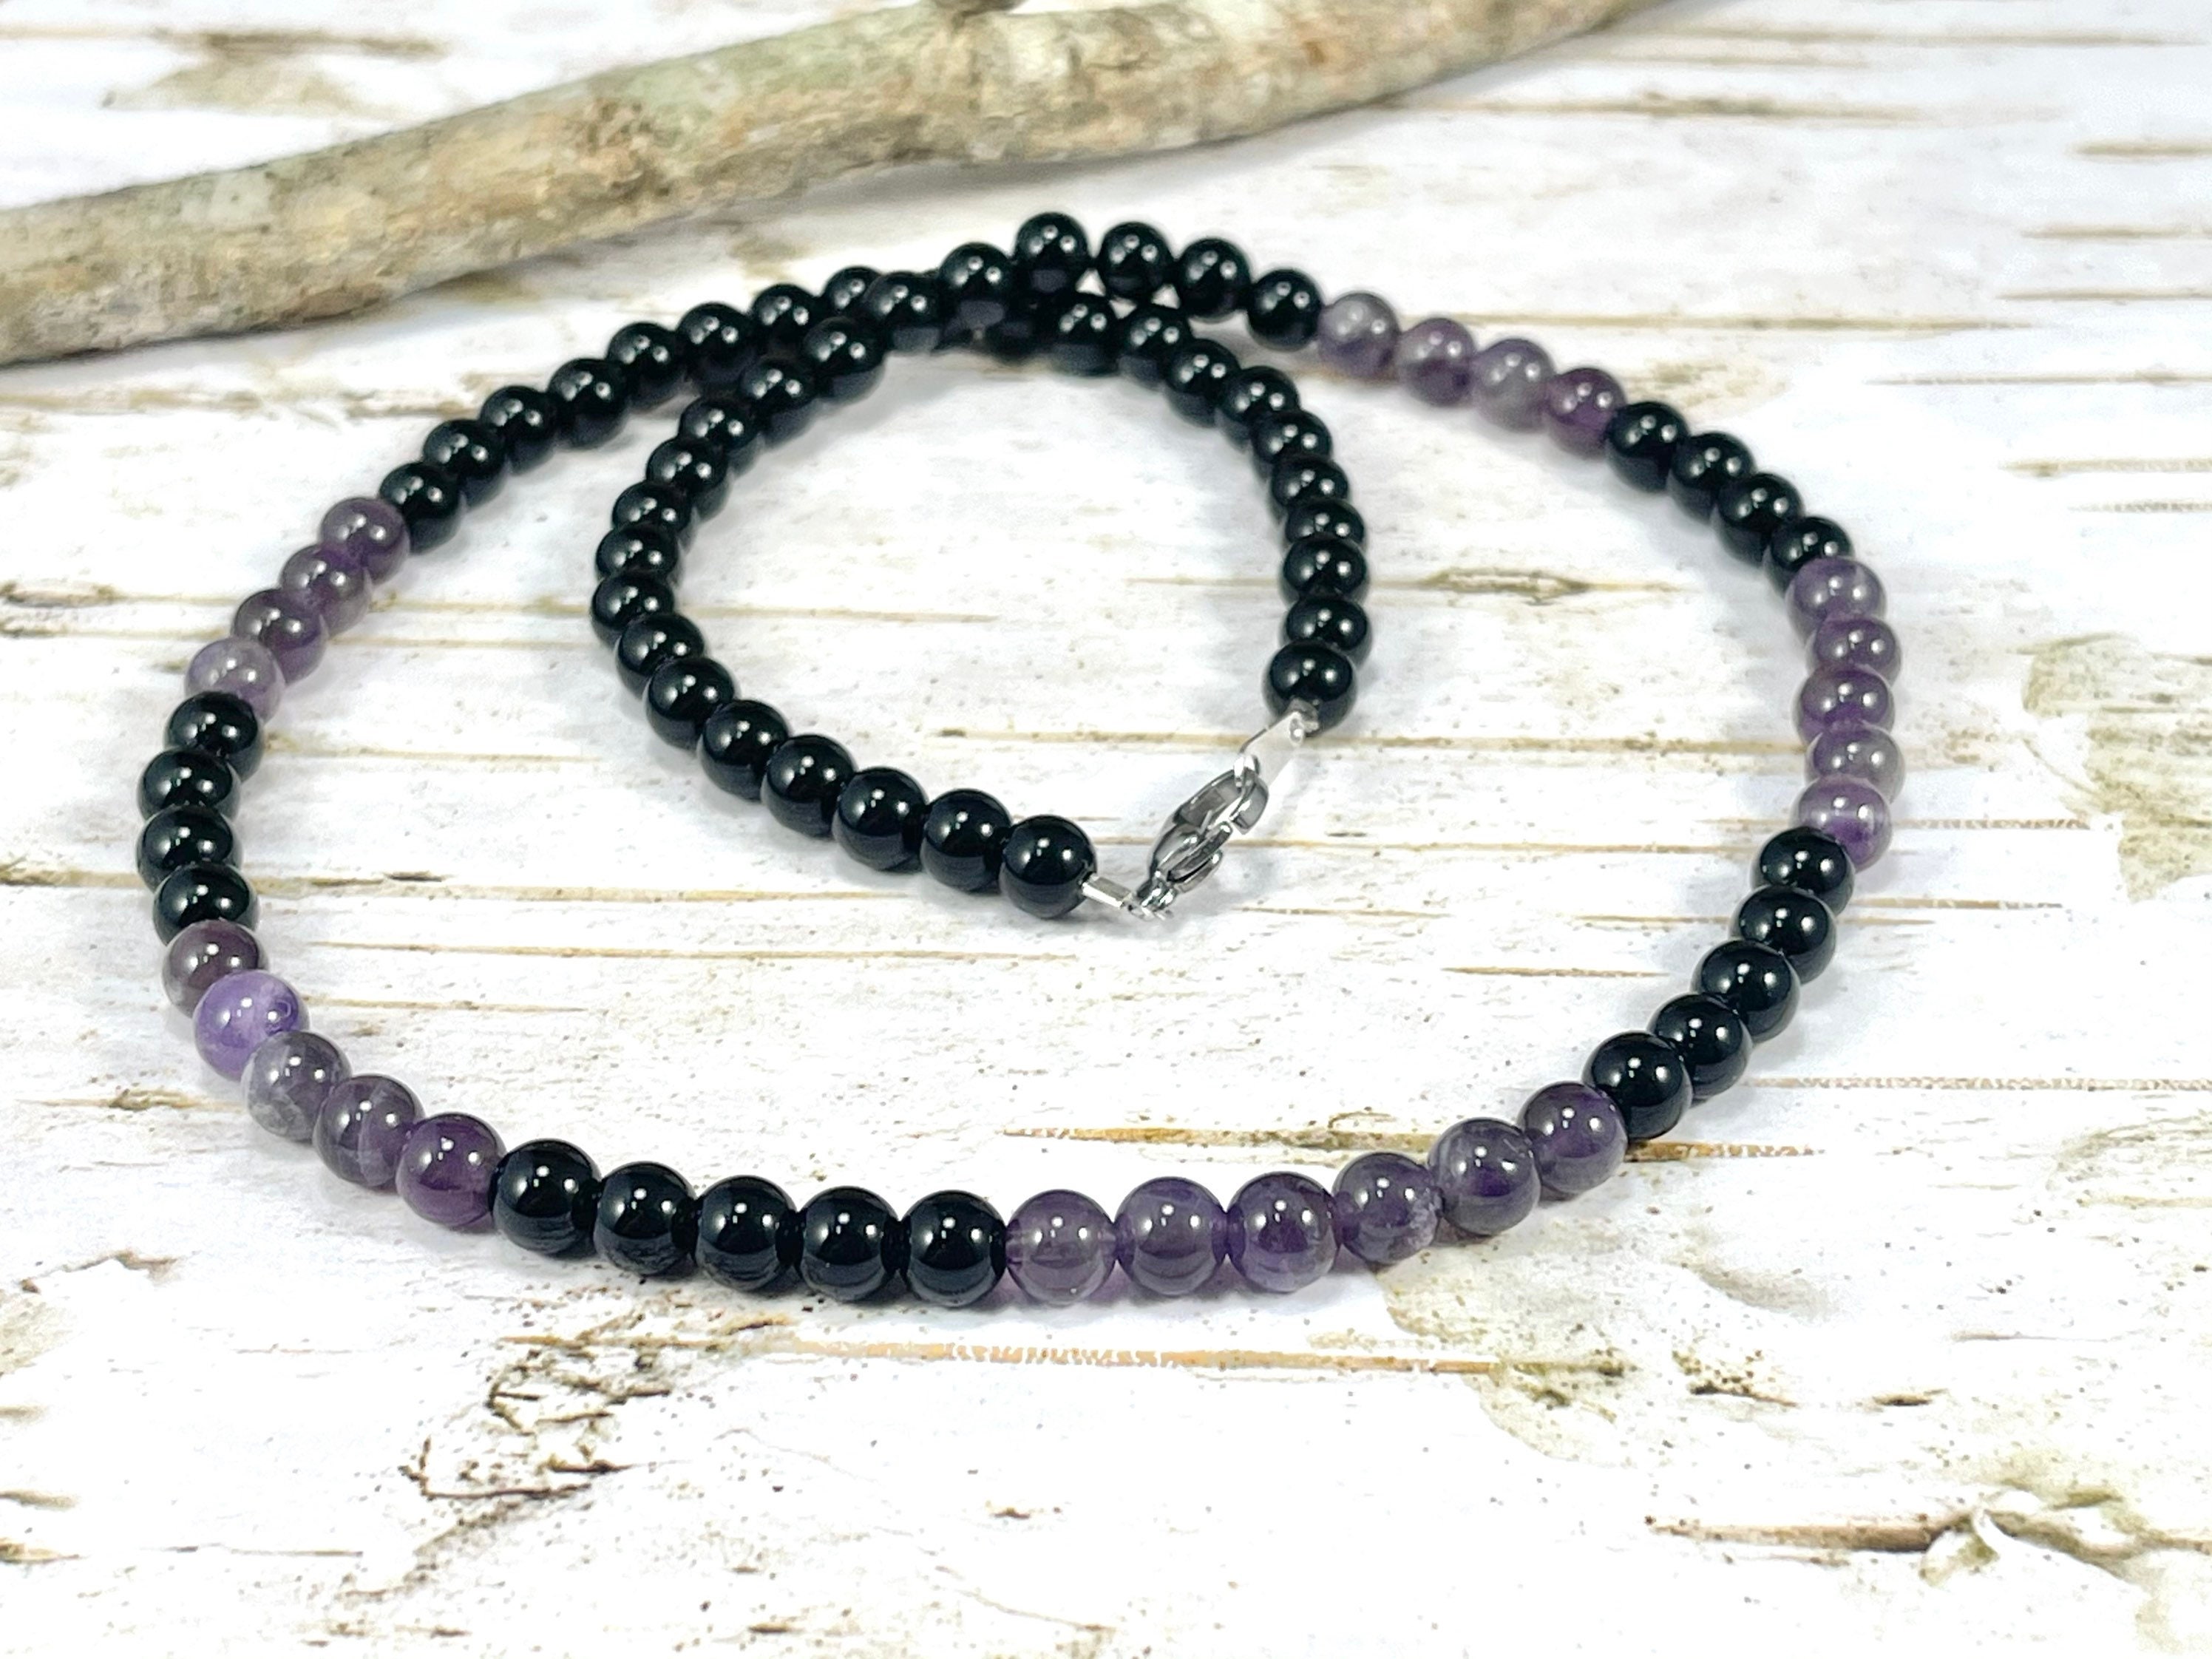 amethyst and obsidian necklace